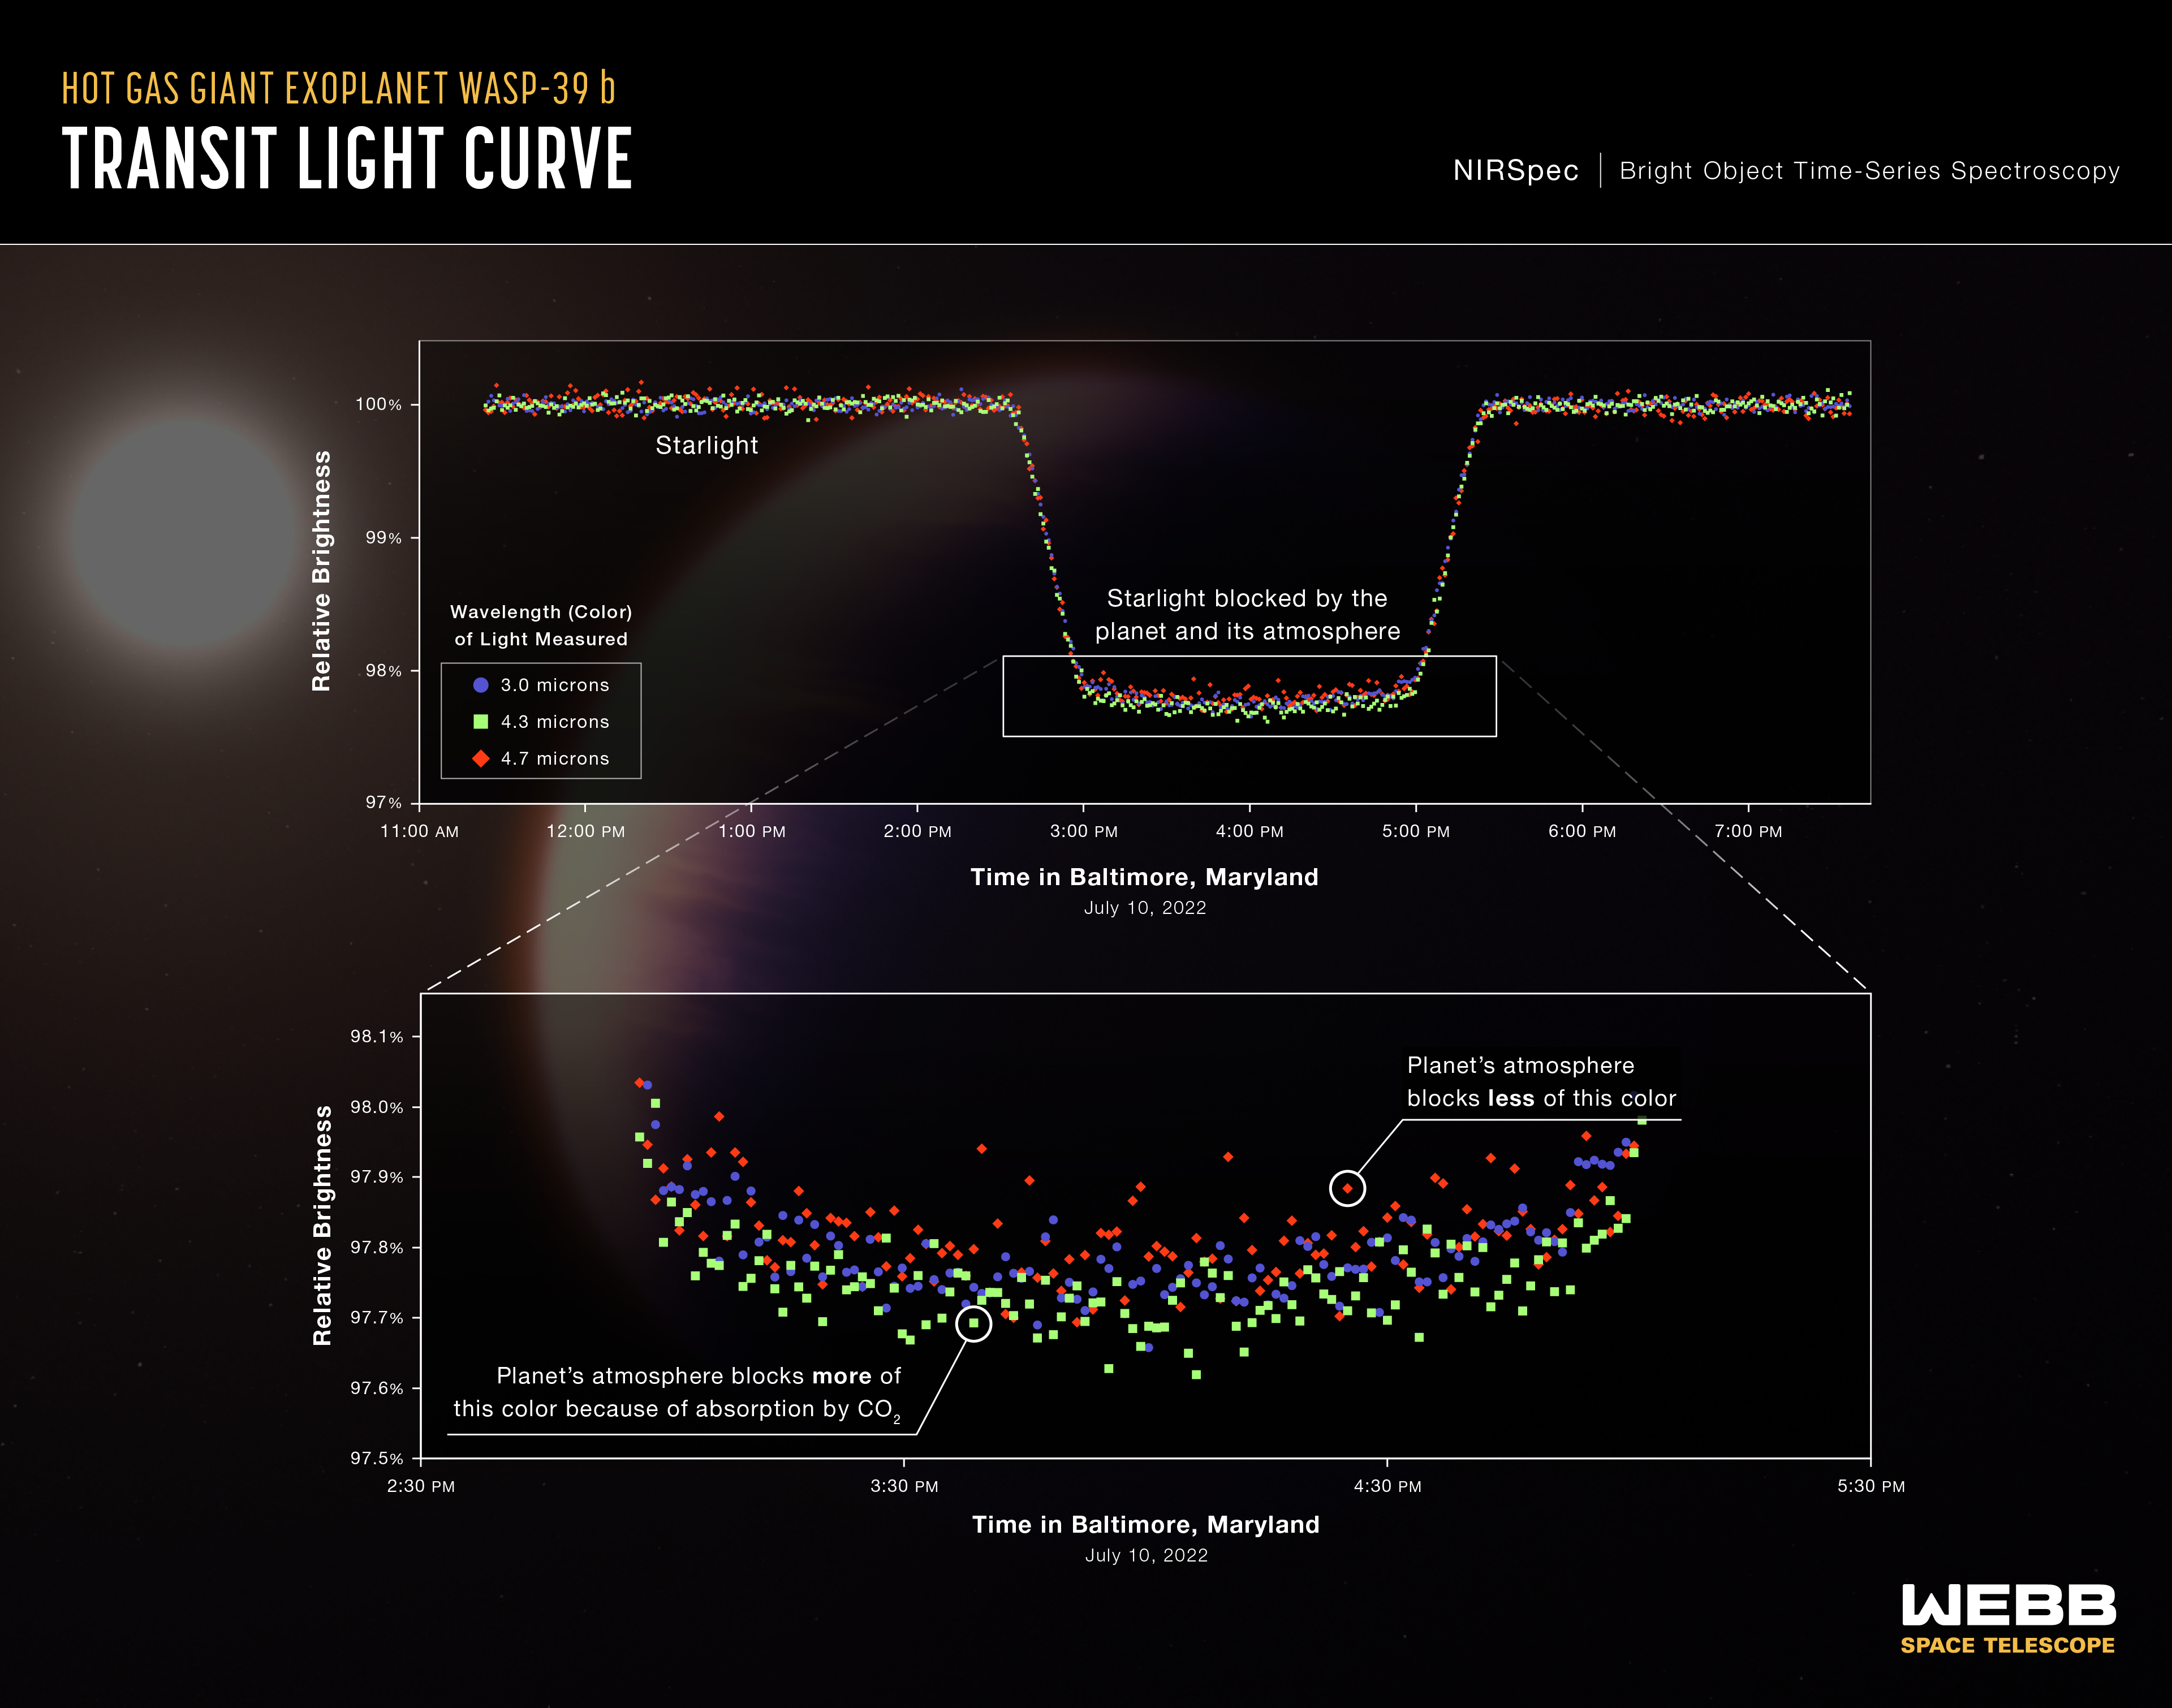 A series of light curves from Webb’s Near-Infrared Spectrograph (NIRSpec) shows the change in brightness of three different wavelengths (colors) of light from the WASP-39 star system over time as the planet transited the star July 10, 2022.